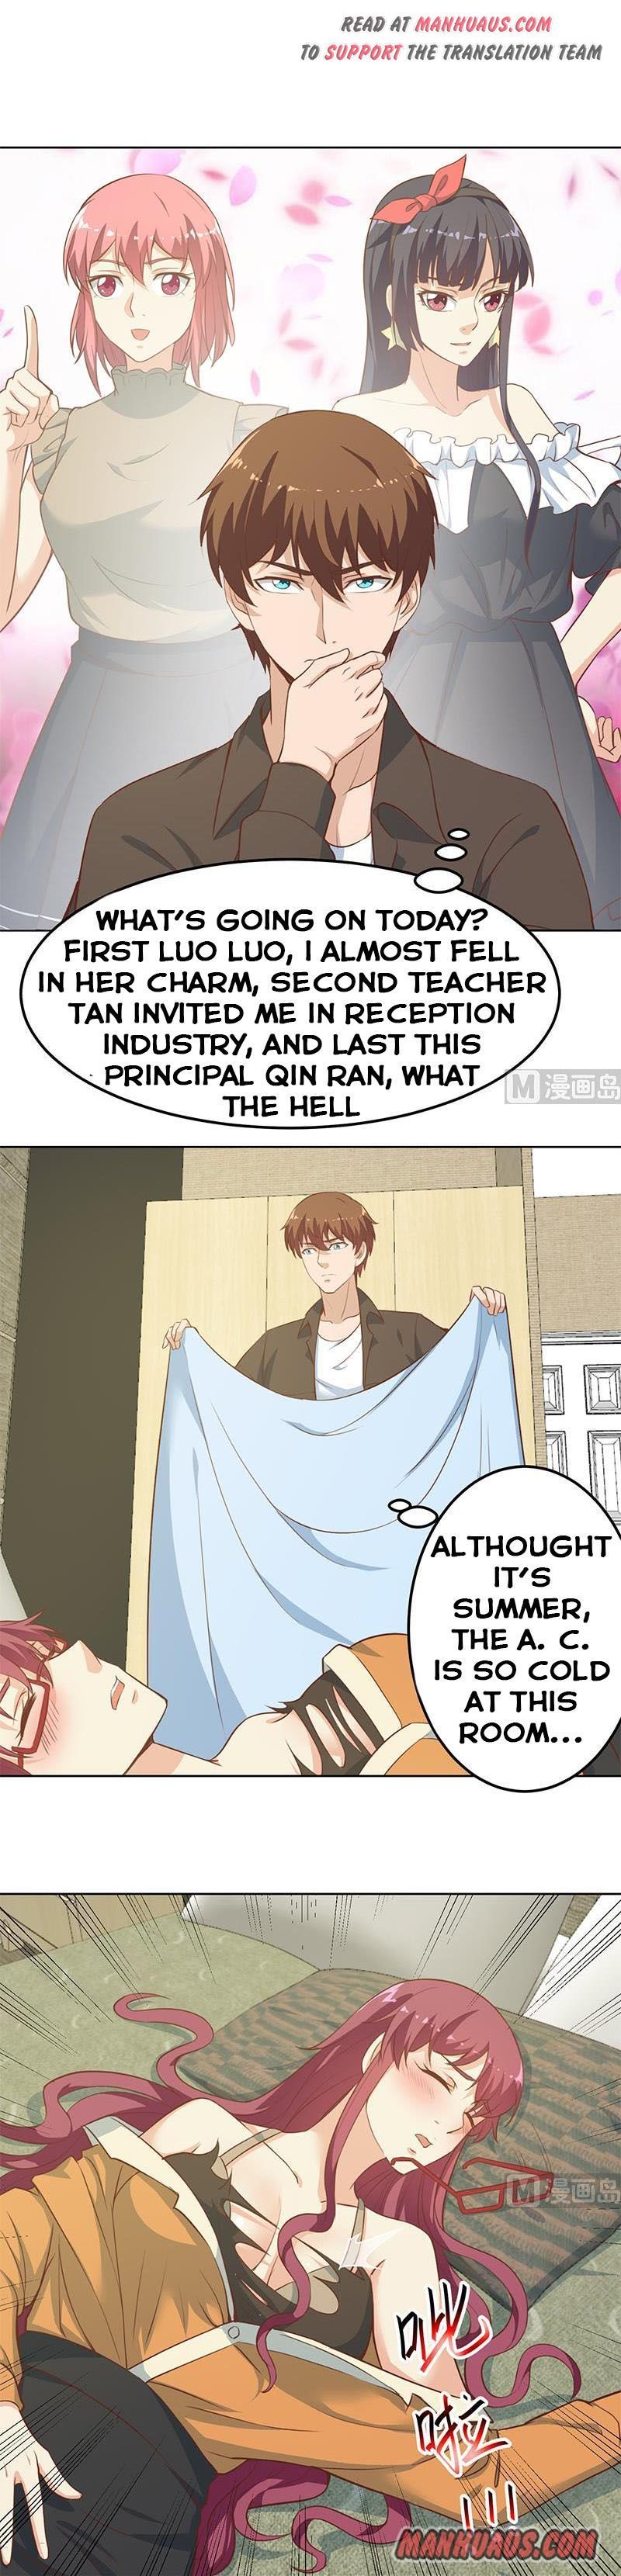 Cultivation Return on Campus Chapter 67 page 4